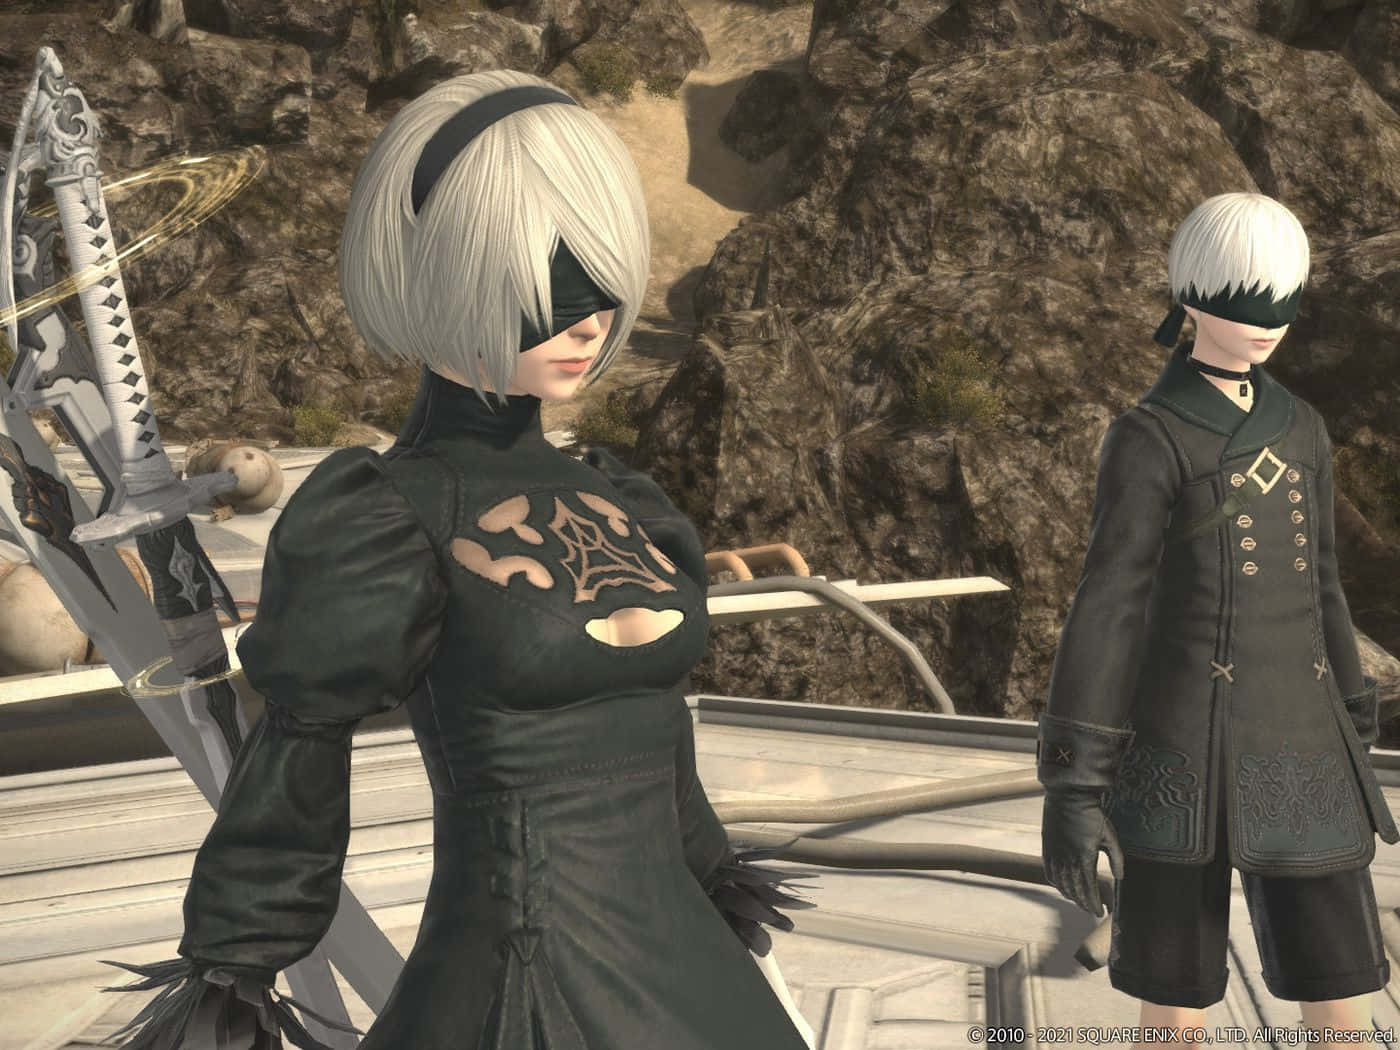 2B and A2, Elite Android Warriors of NieR Automata